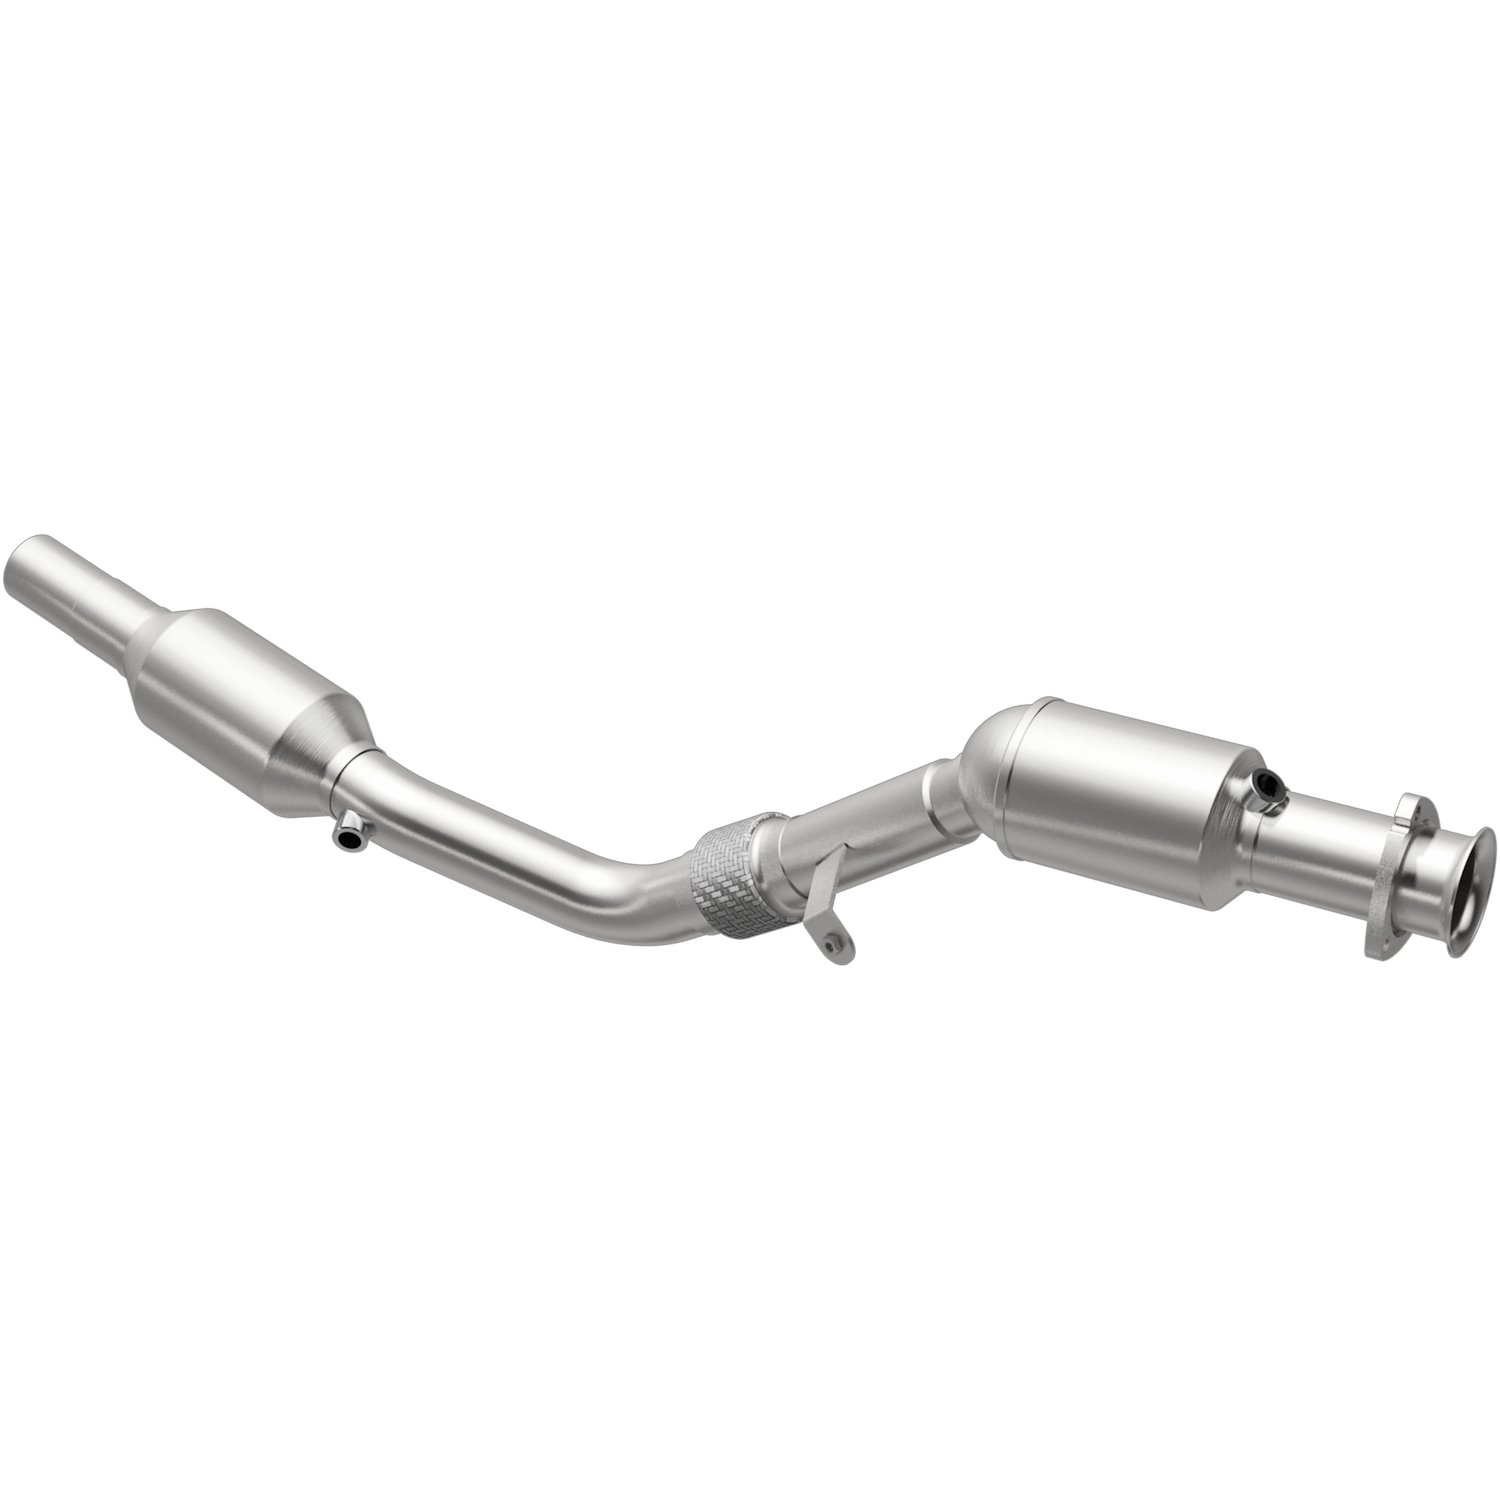 2004-2009 Audi S4 OEM Grade Federal / EPA Compliant Direct-Fit Catalytic Converter